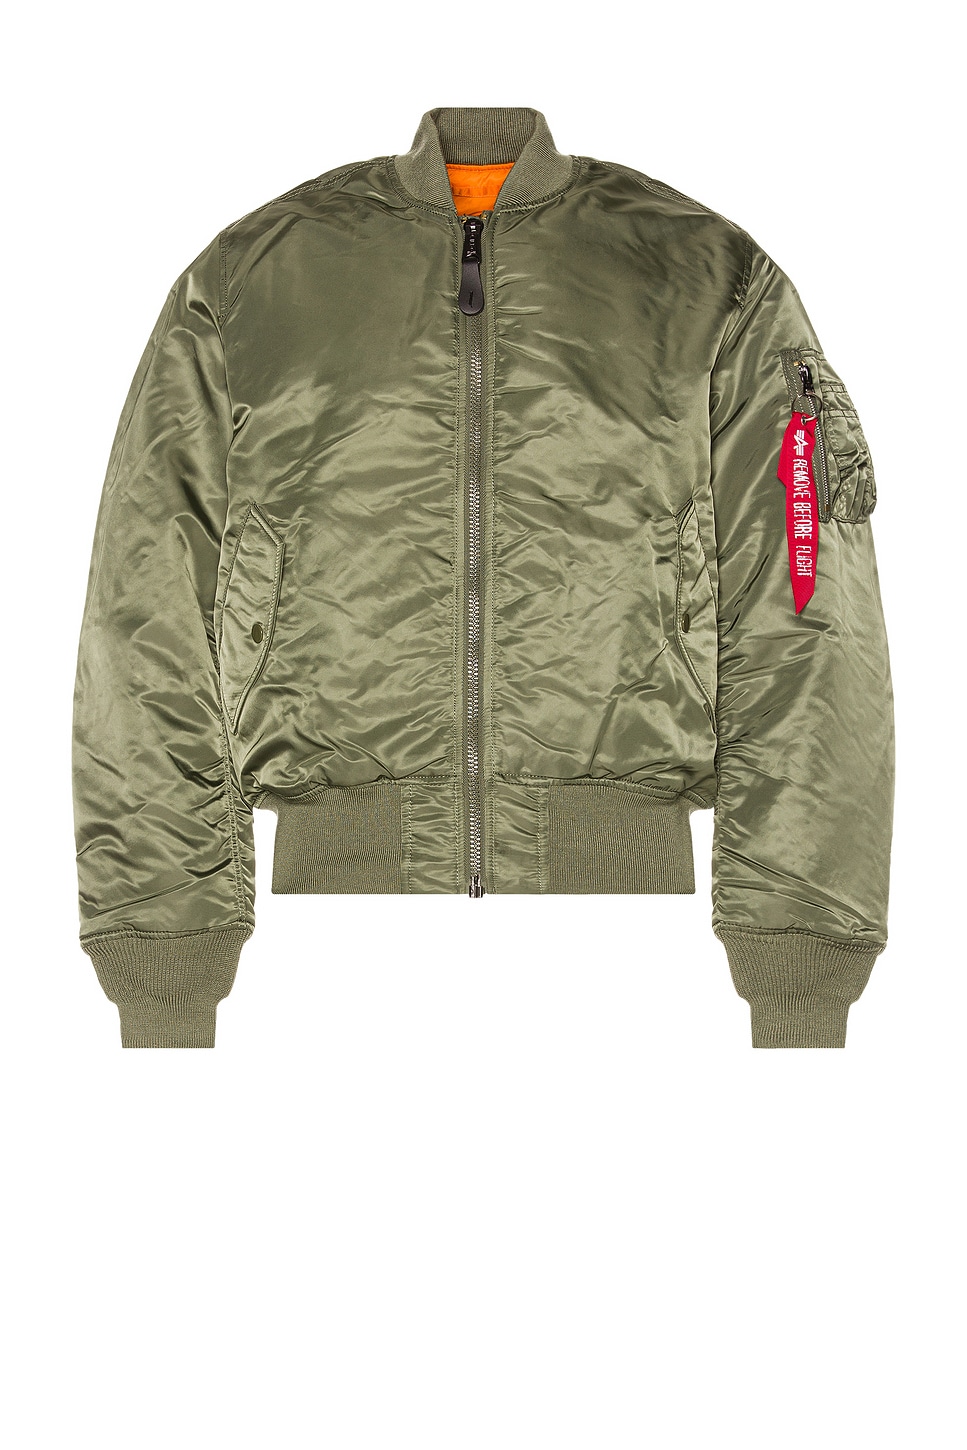 MA-1 Bomber Jacket in Sage